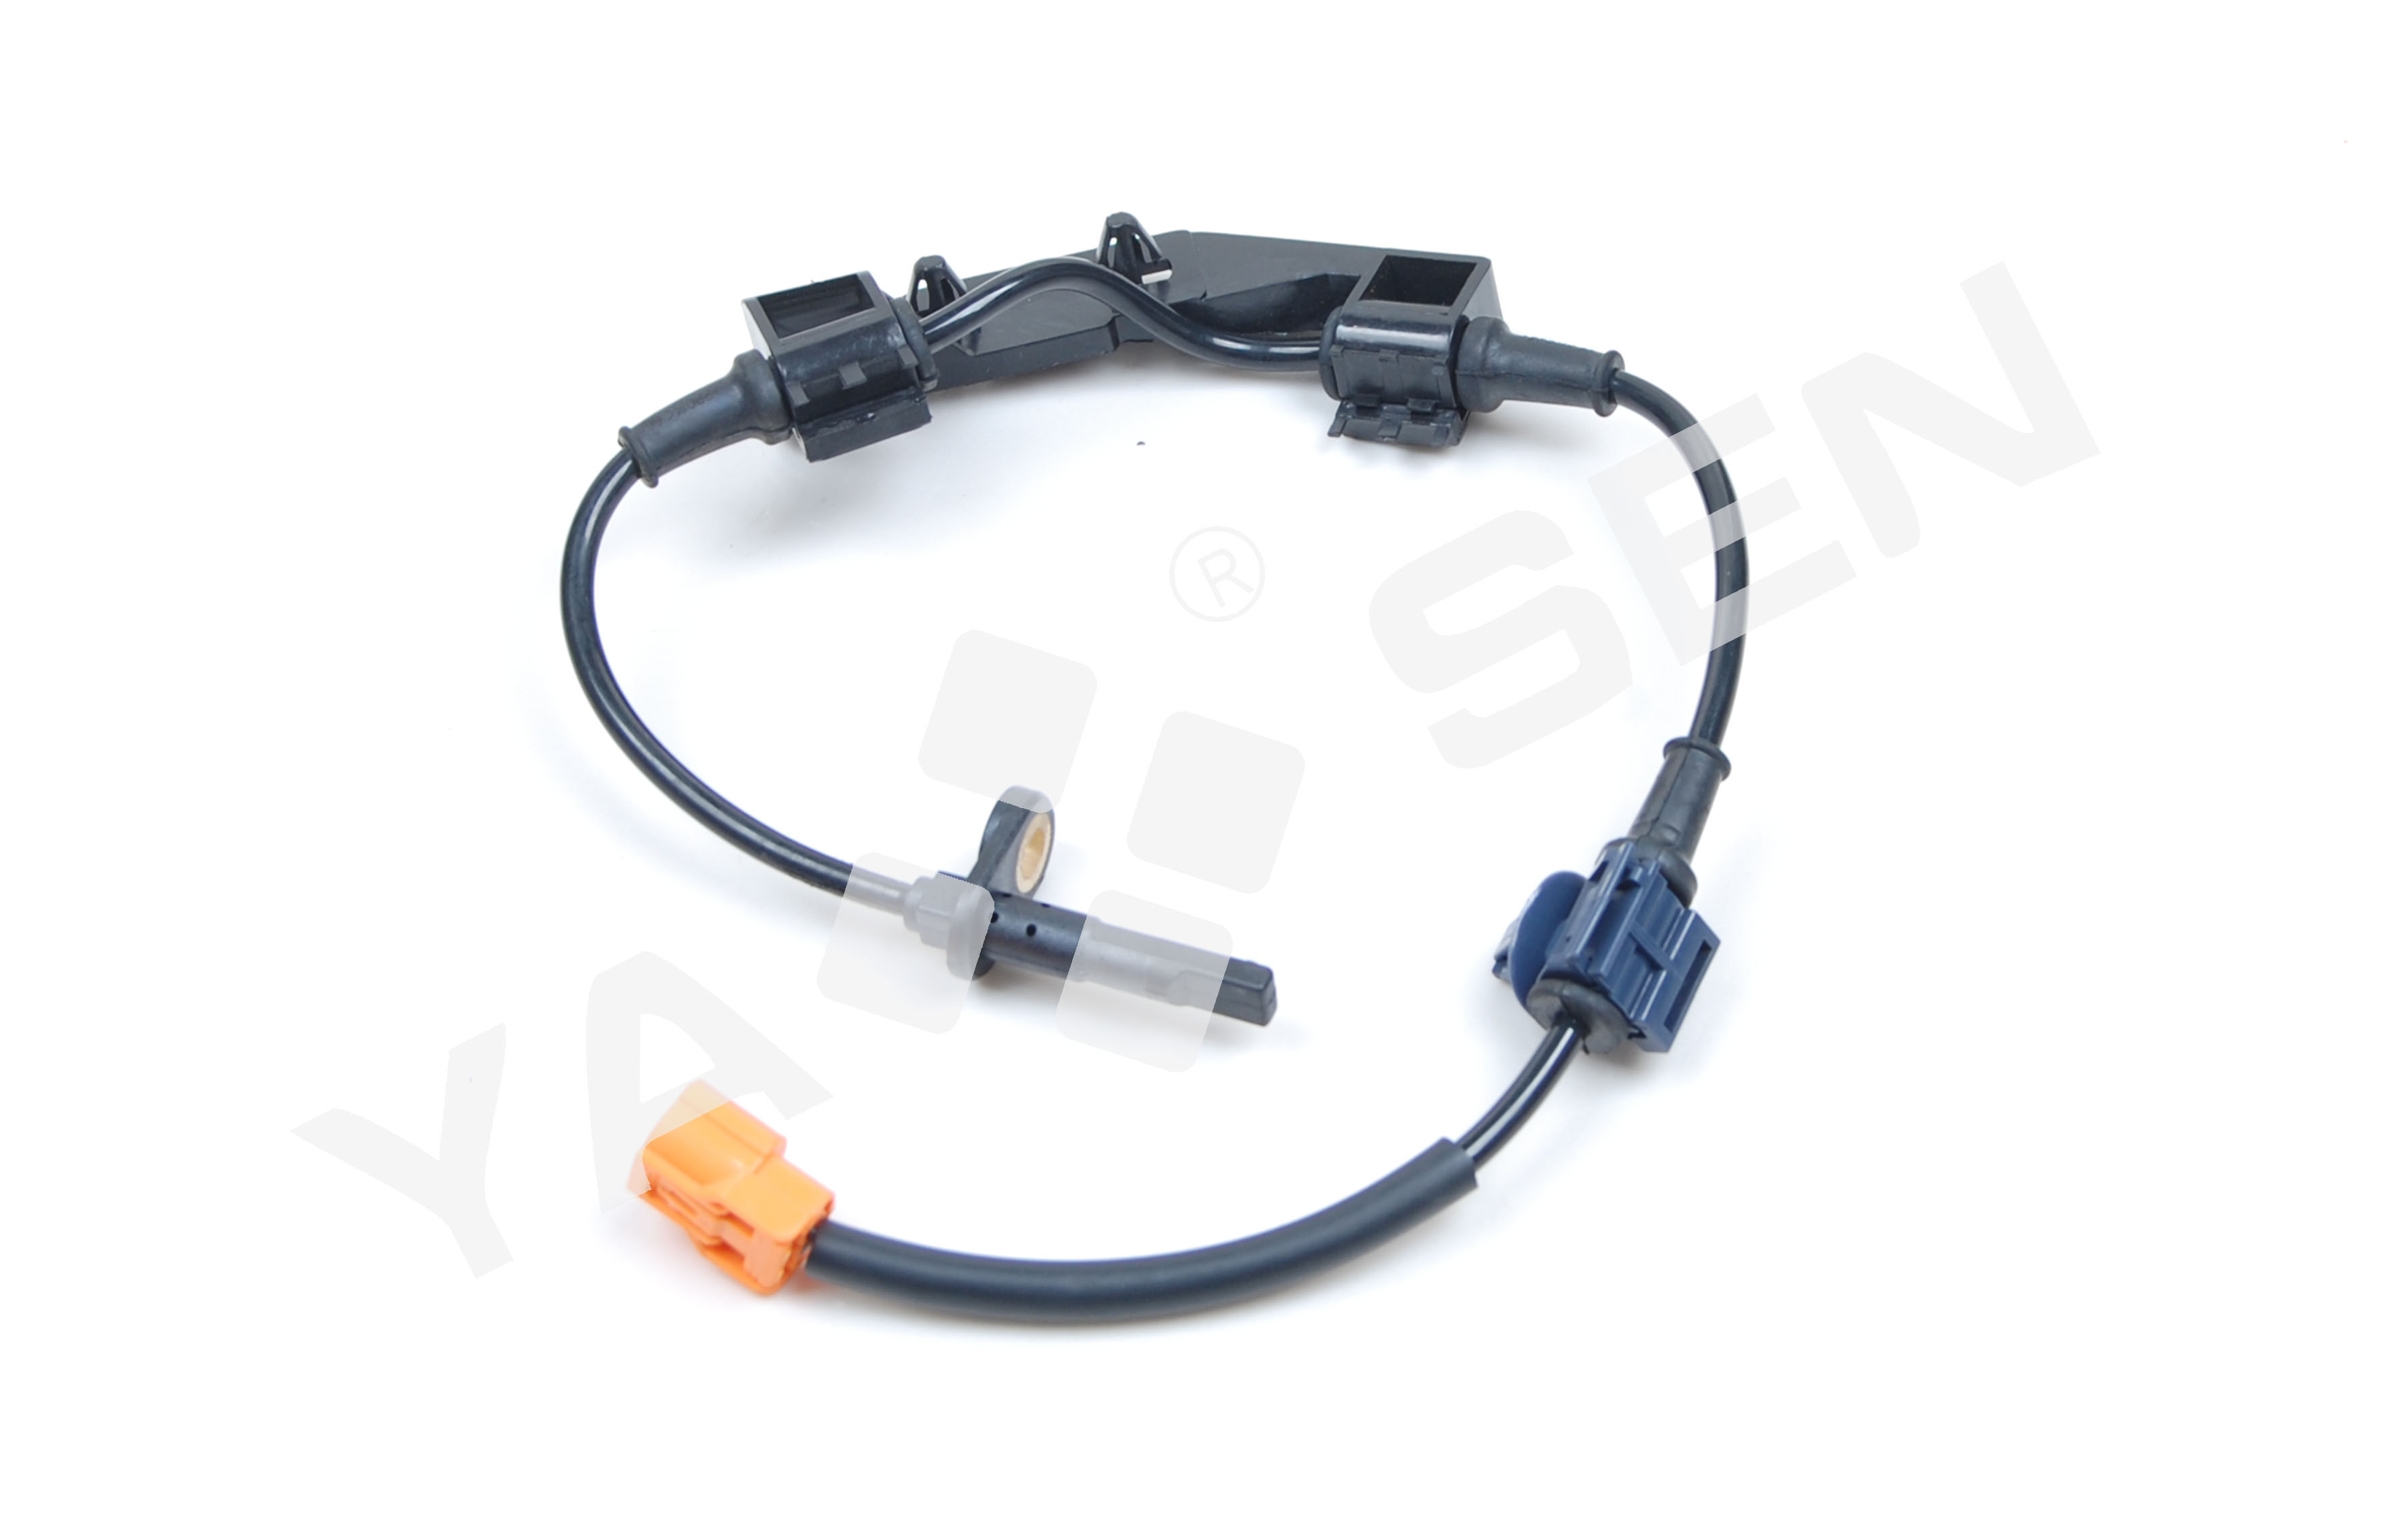 Chinese wholesale Chevrolet Abs Sensor - ABS Wheel Speed Sensor for HONDA, 57470-S9A-013 57470-S9A-003 ALS1101 SU9121 5S7631 695886 ALS2861 – YASEN